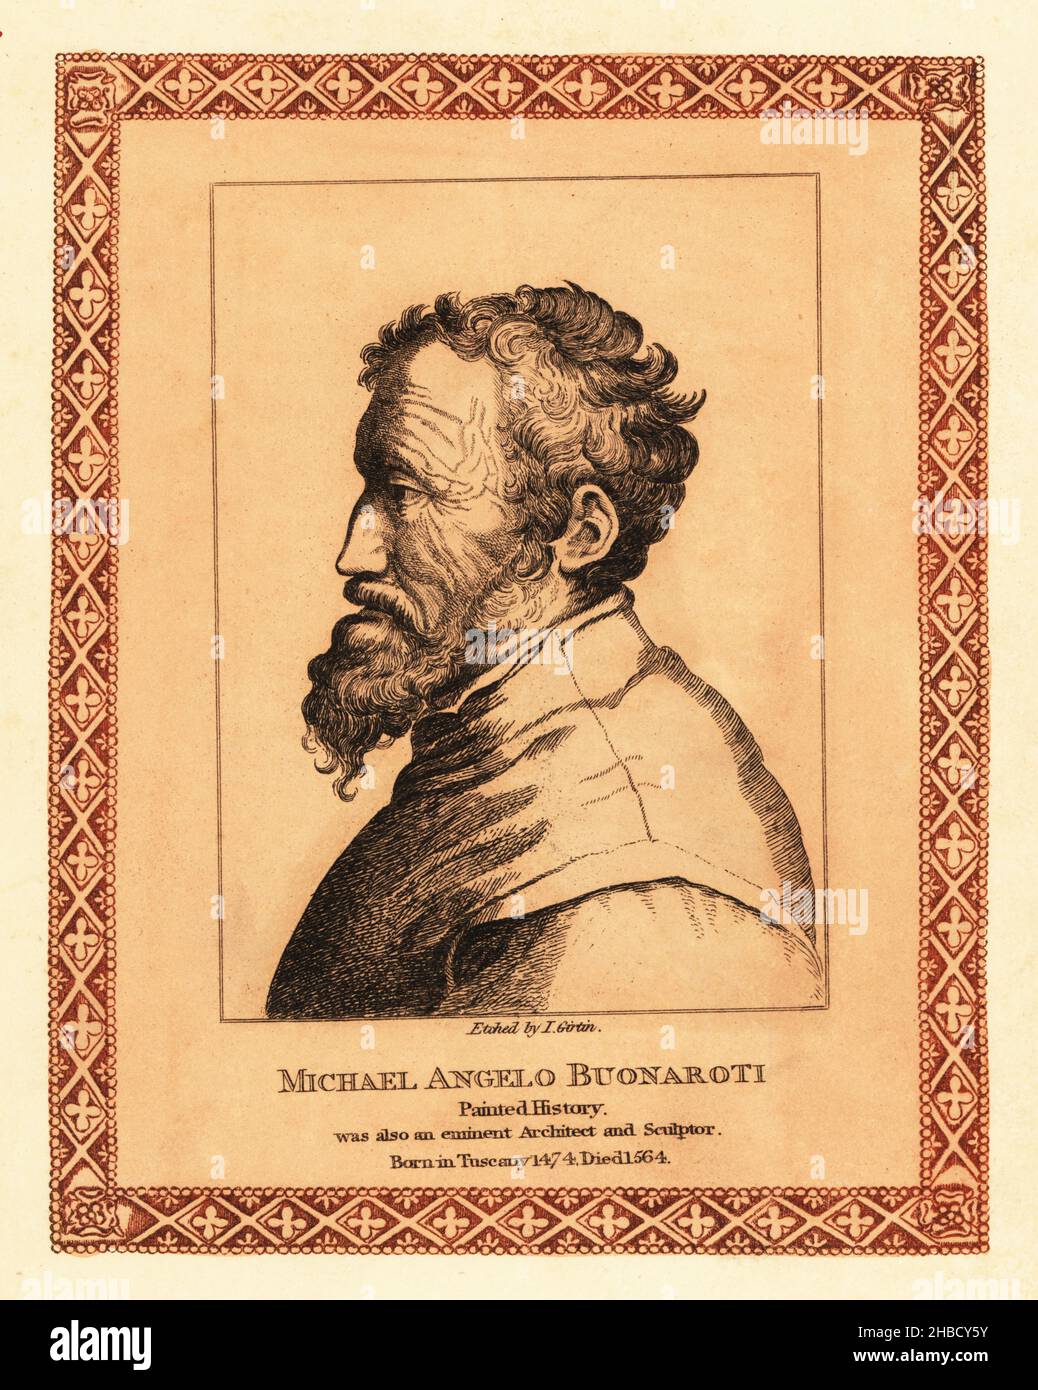 Portrait of Michelangelo (1475-1564), Italian sculptor, painter, architect and poet of the High Renaissance. Tinted etching within a decorative border by John Girtin after an etching by Giulio Antonio Bonasone from John Girtin’s Seventy-Five Portraits of Celebrated Painters from Authentic Originals, J. M’Creery, London, 1817. Stock Photo